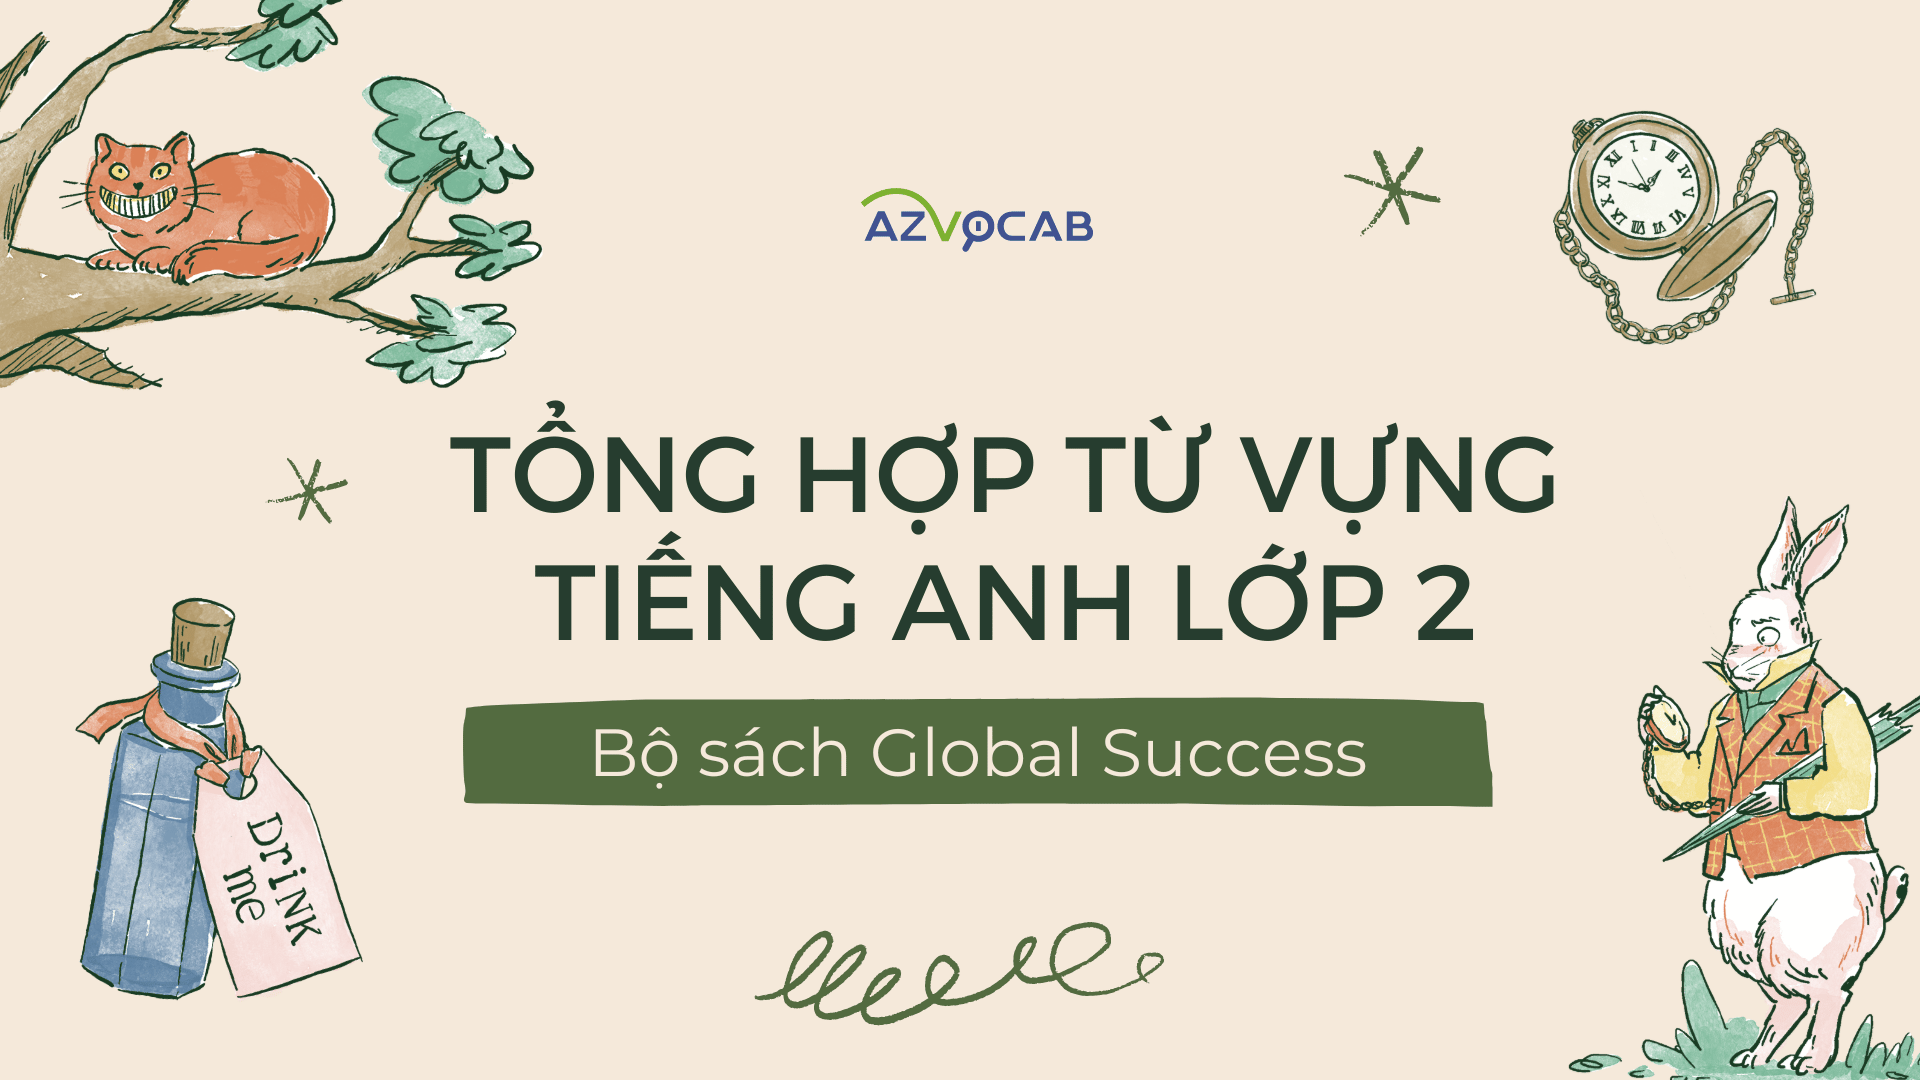 Tiếng Anh lớp 2 Global Success